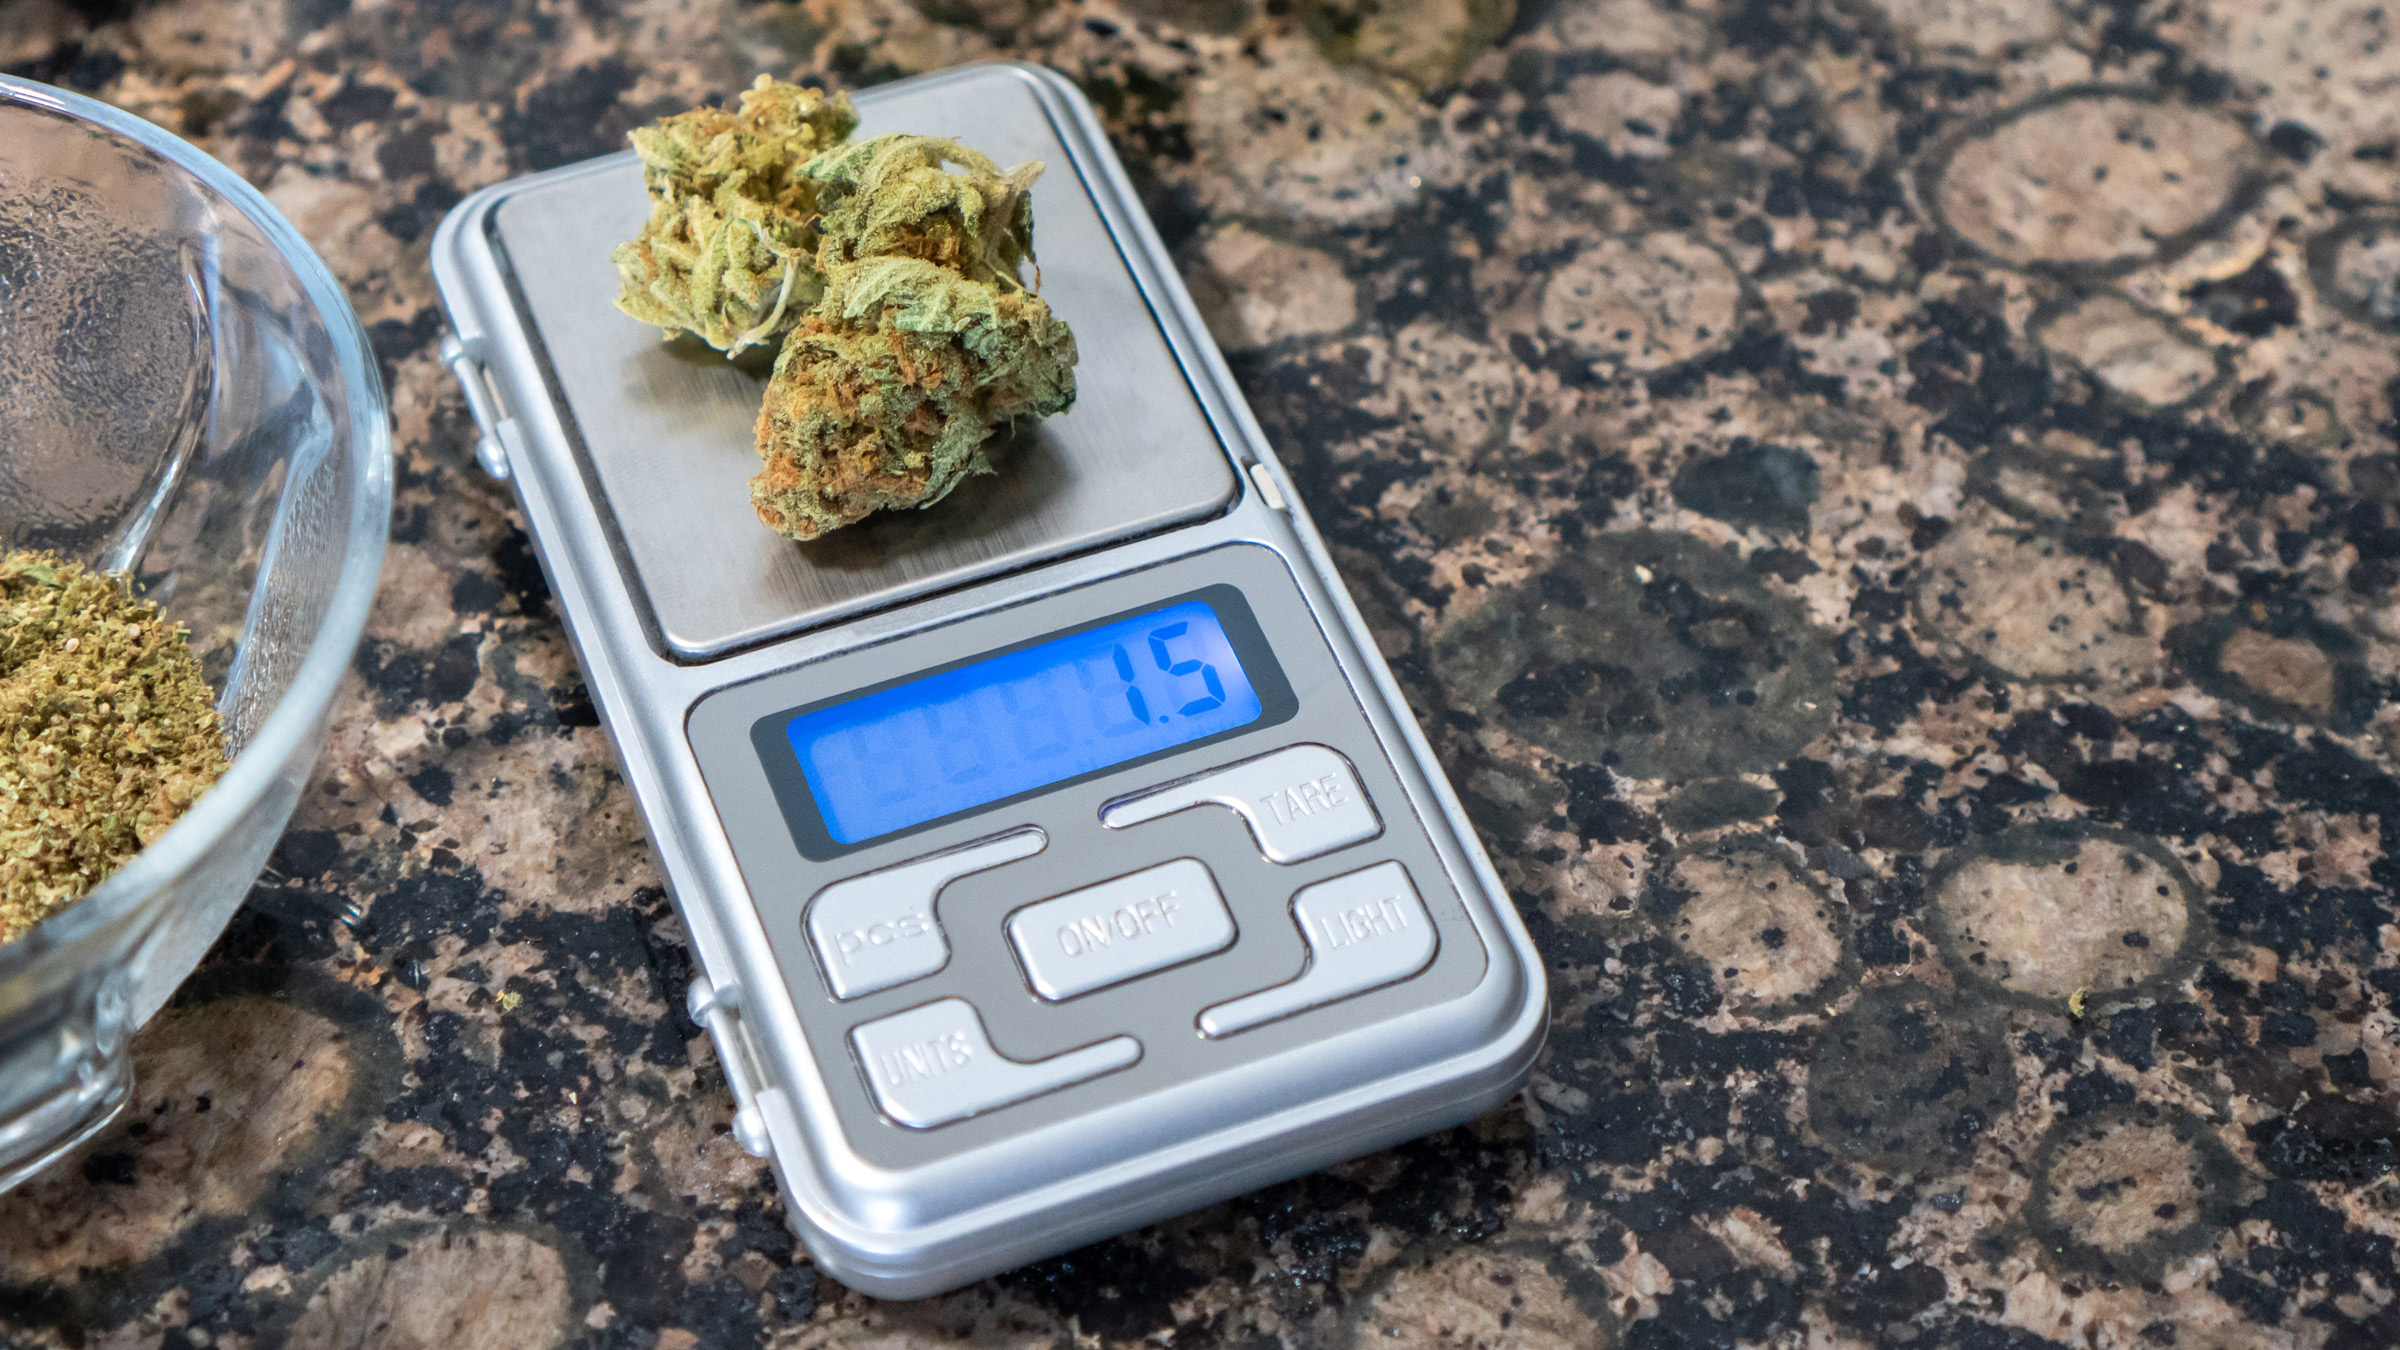 Do You Know How Many 8ths Are In A Pound? (And Other Cannabis